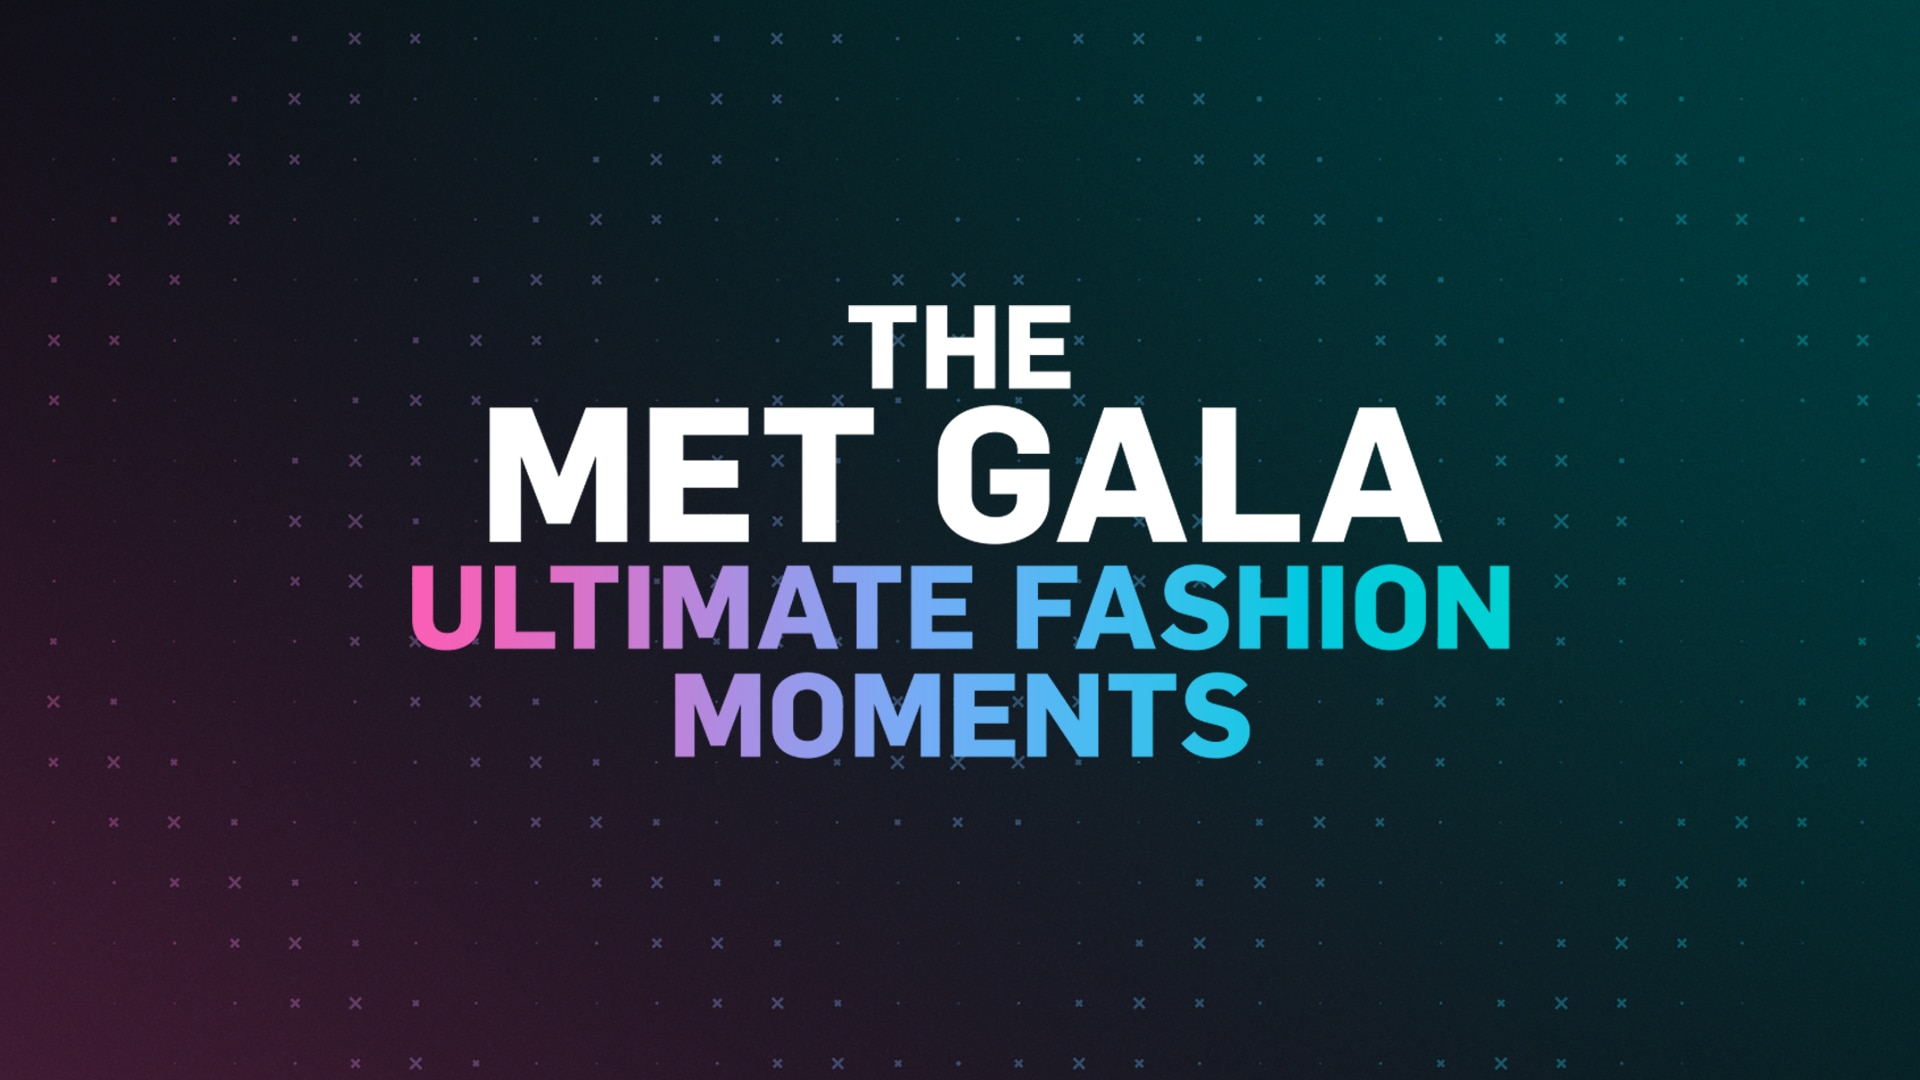 The Met Gala Ultimate Fashion Moments